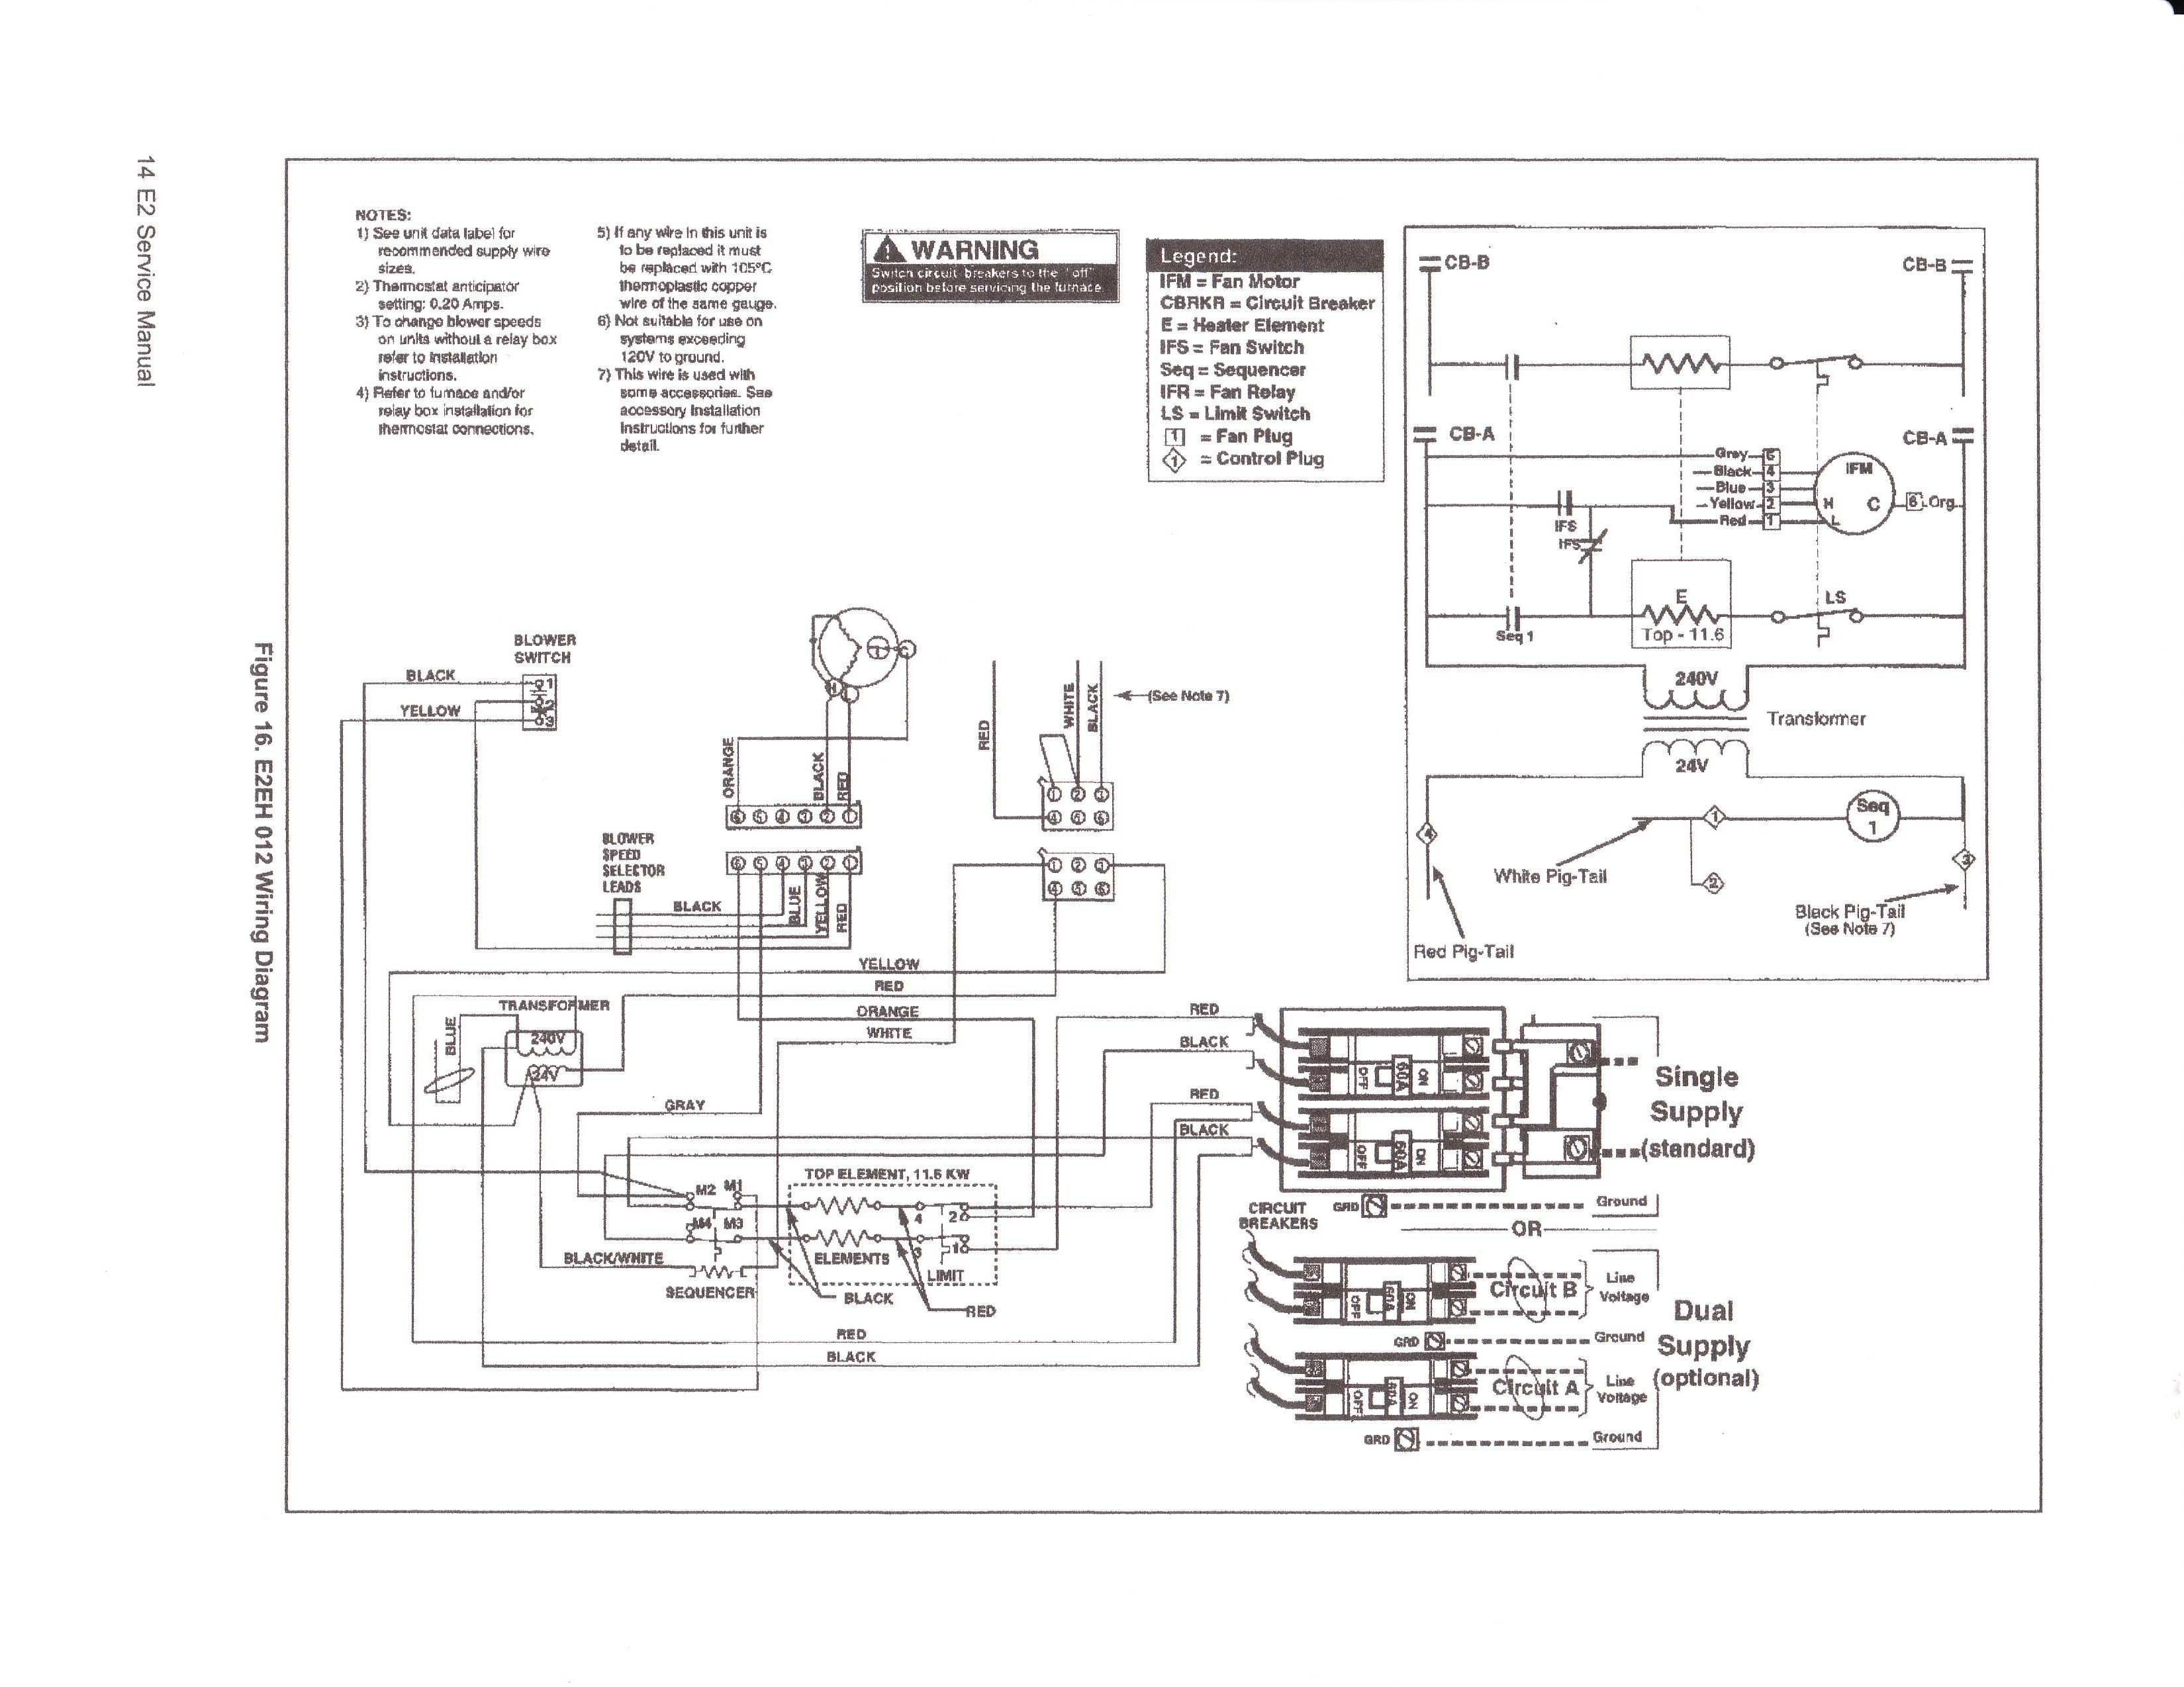 Furnace Fuse Box | Wiring Library - Coleman Electric Furnace Wiring Diagram